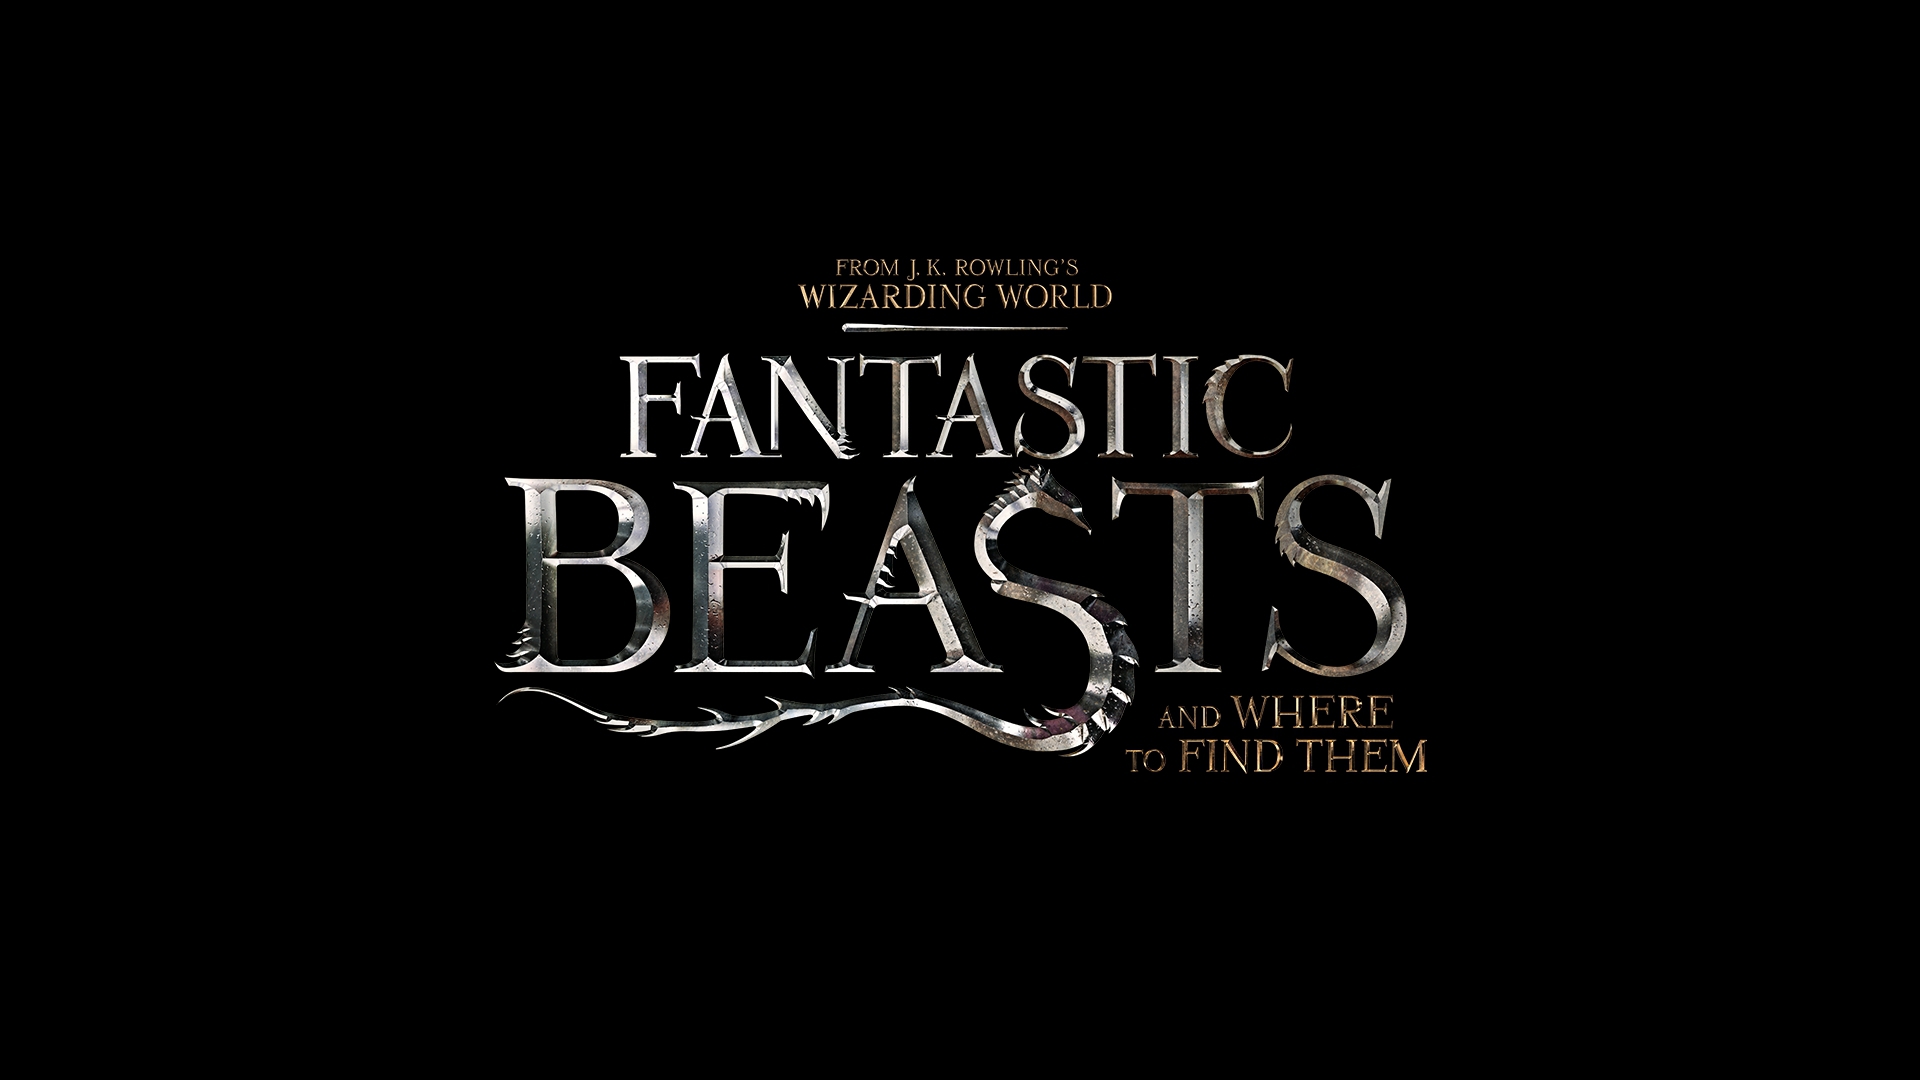 Watch Online 2016 Movie Full HD Fantastic Beasts And Where To Find Them